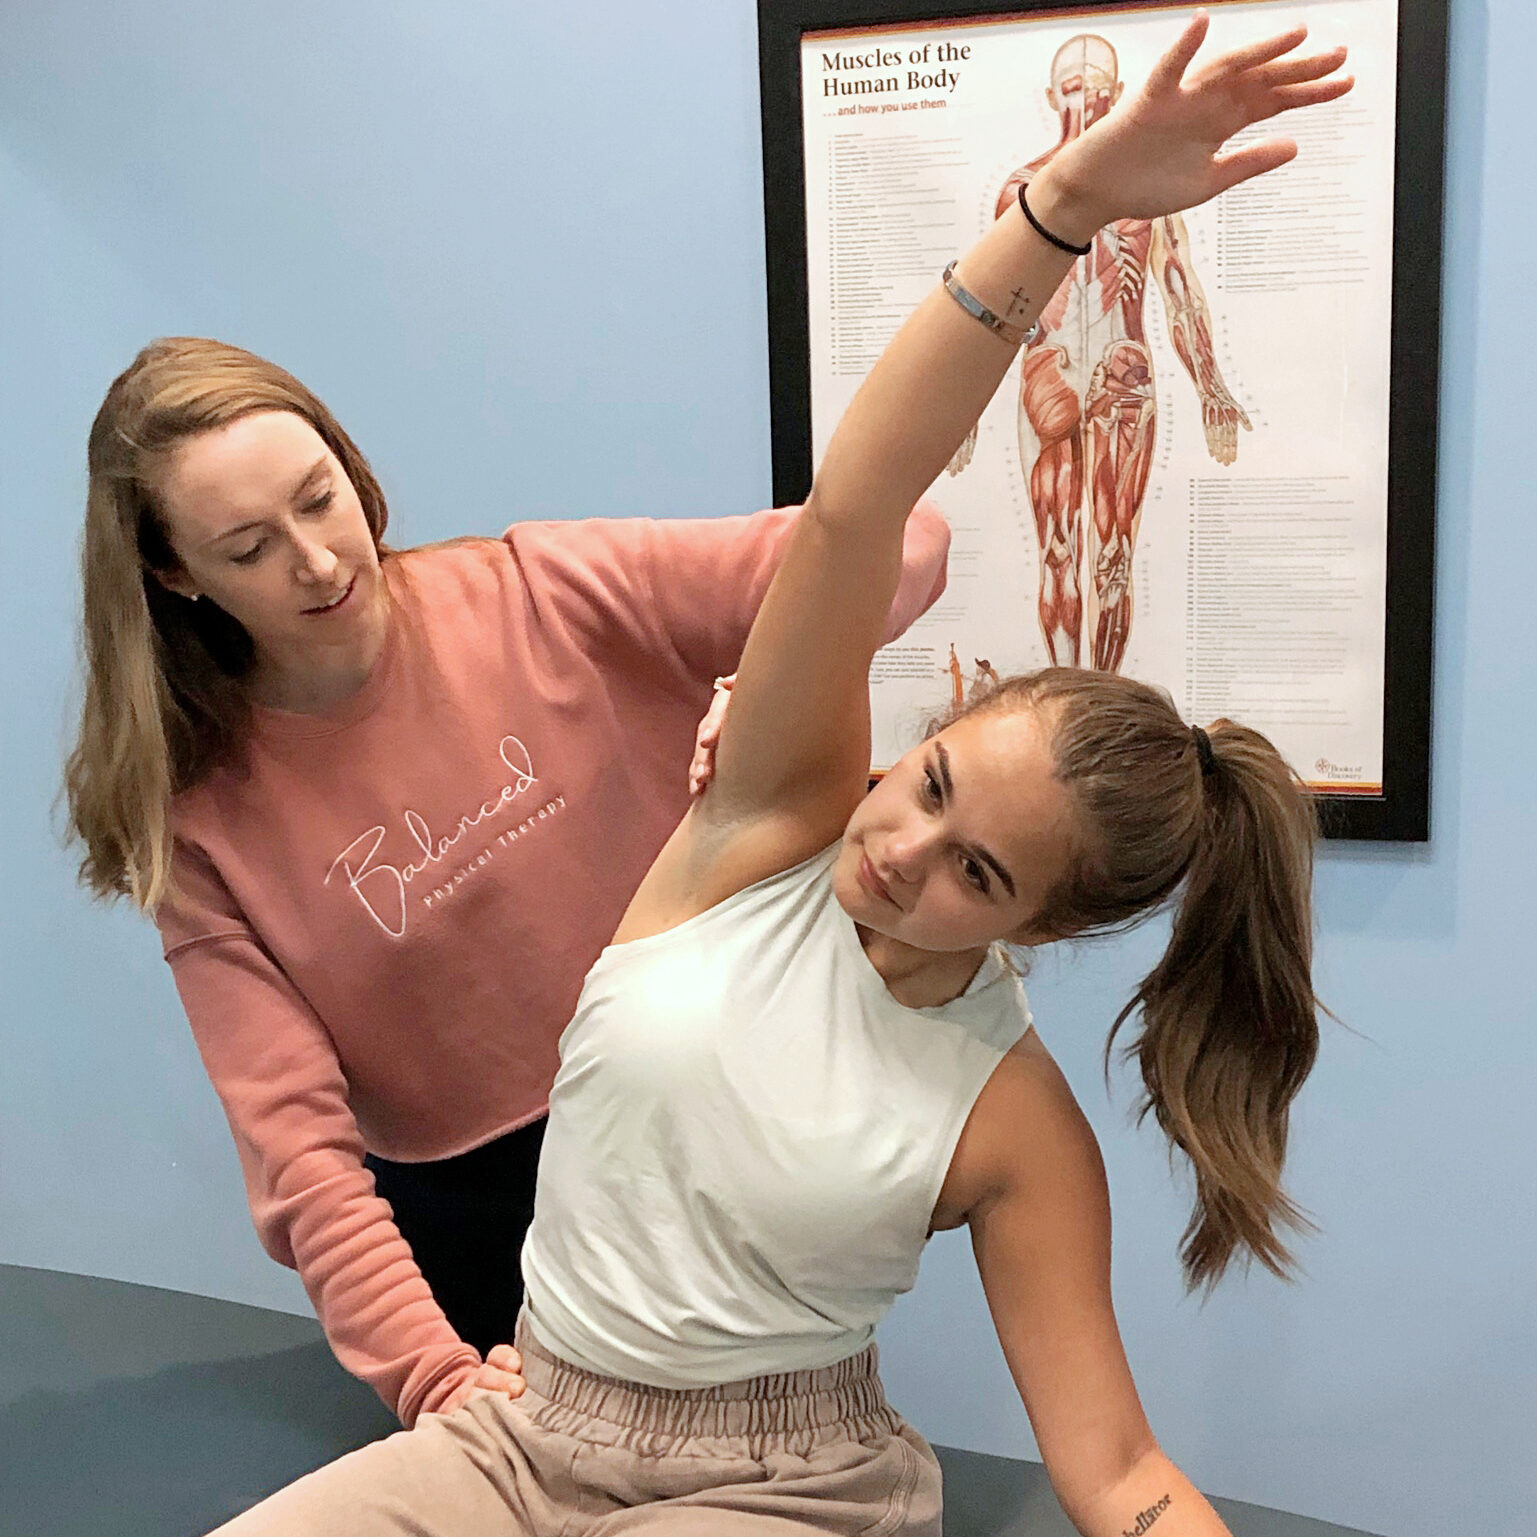 a female physical therapist wearing a pink sweatshirt helping a female dancer stretch laterally on an examination table